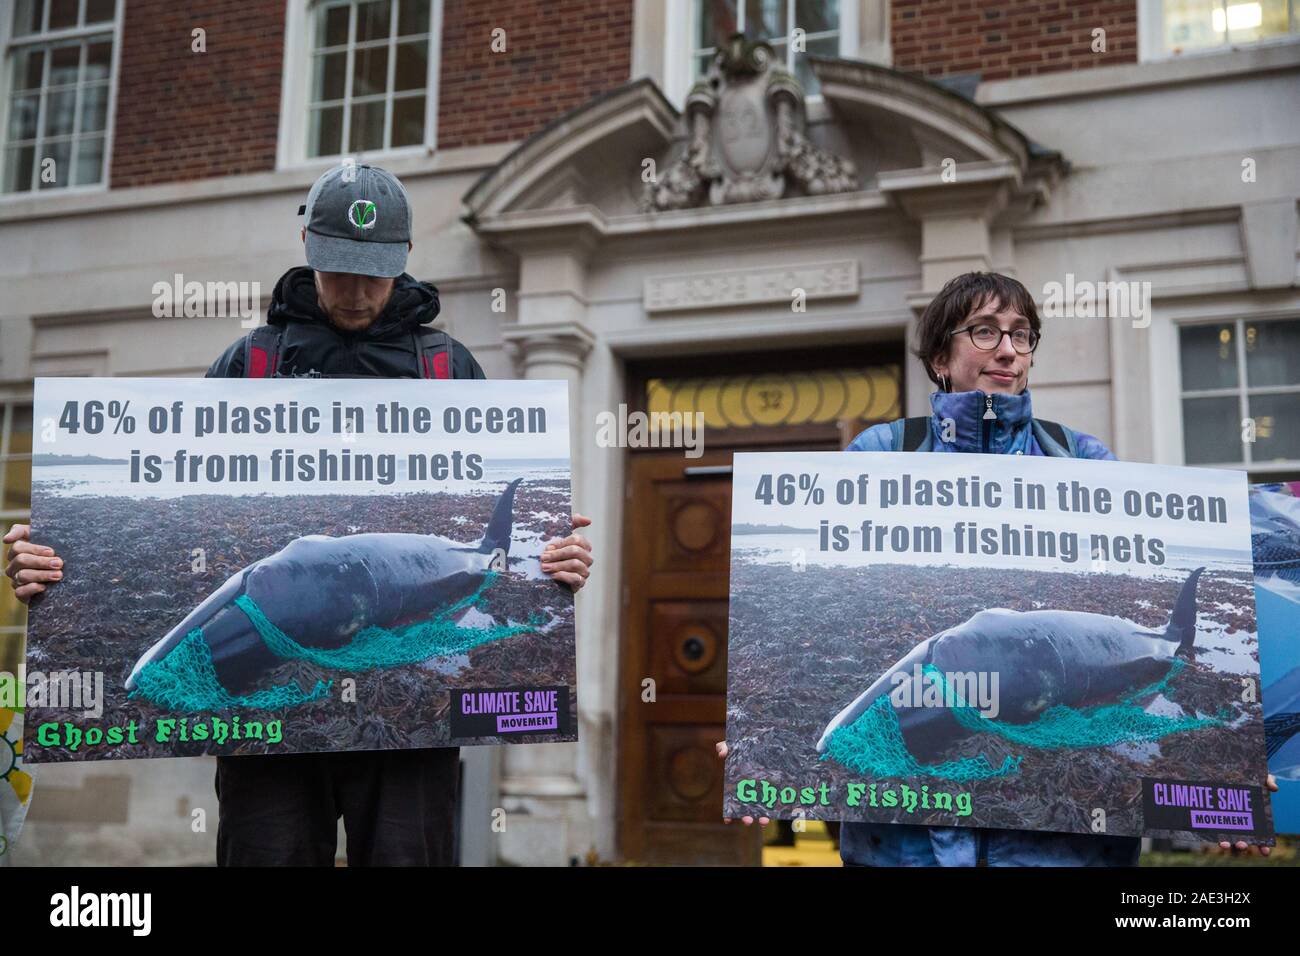 London, UK. 6 December, 2019. Activists from Sea Life Extinction Rebellion, joined by activists from Animal Rebellion, protest against super-trawlers outside the European Commission’s offices in Westminster. Super-trawlers are responsible for much illegal fishing, using nets as large as three football pitches, catching endangered species such as hammerhead sharks and dolphins and processing, storing and freezing thousands of tons of fish during weeks of continuous fishing. Credit: Mark Kerrison/Alamy Live News Stock Photo